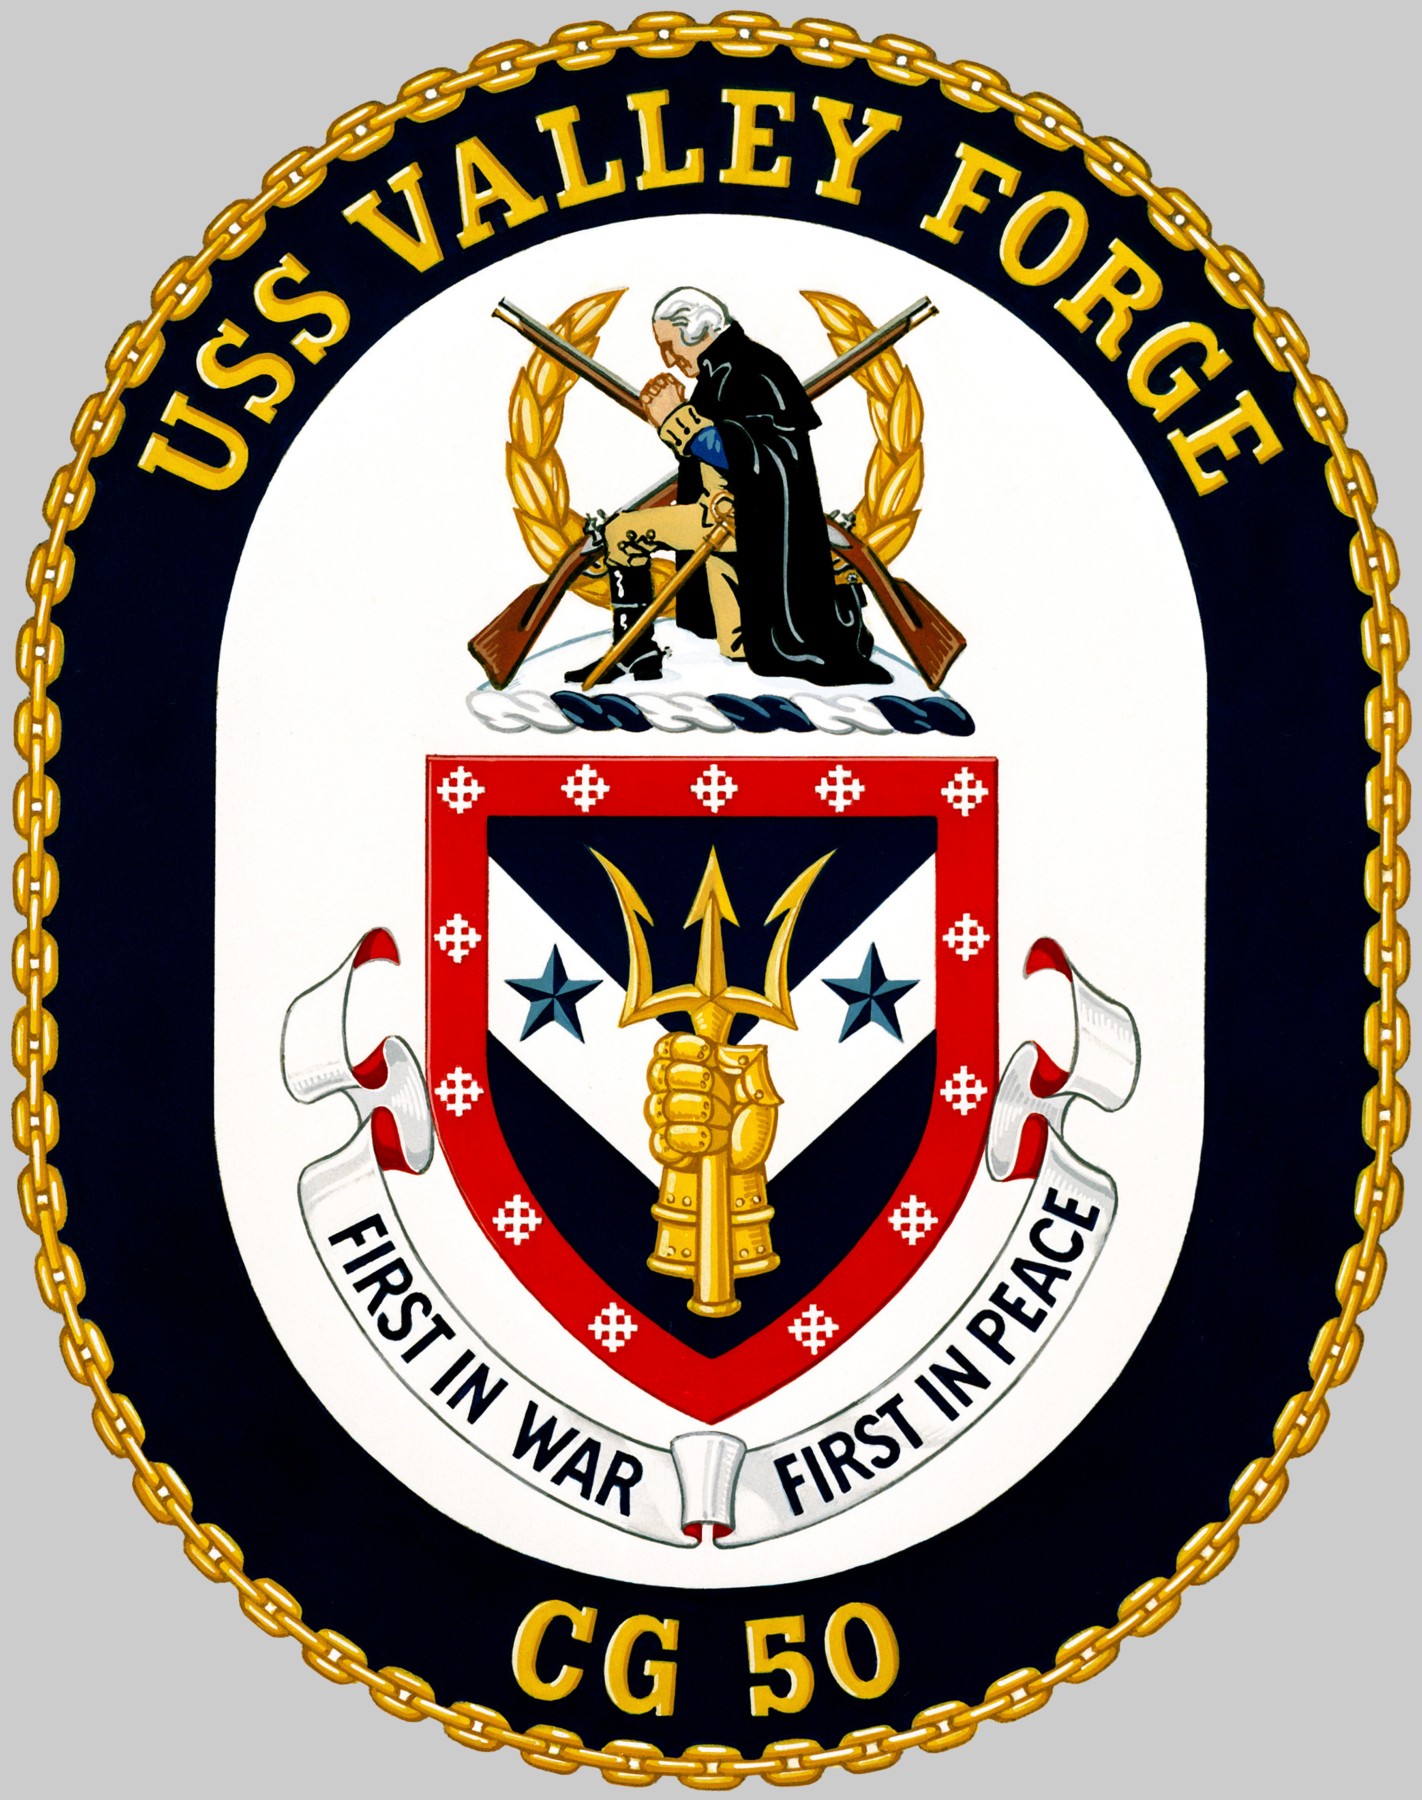 cg-50 uss valley forge insignia crest patch badge ticonderoga class guided missile cruiser aegis us navy 03x